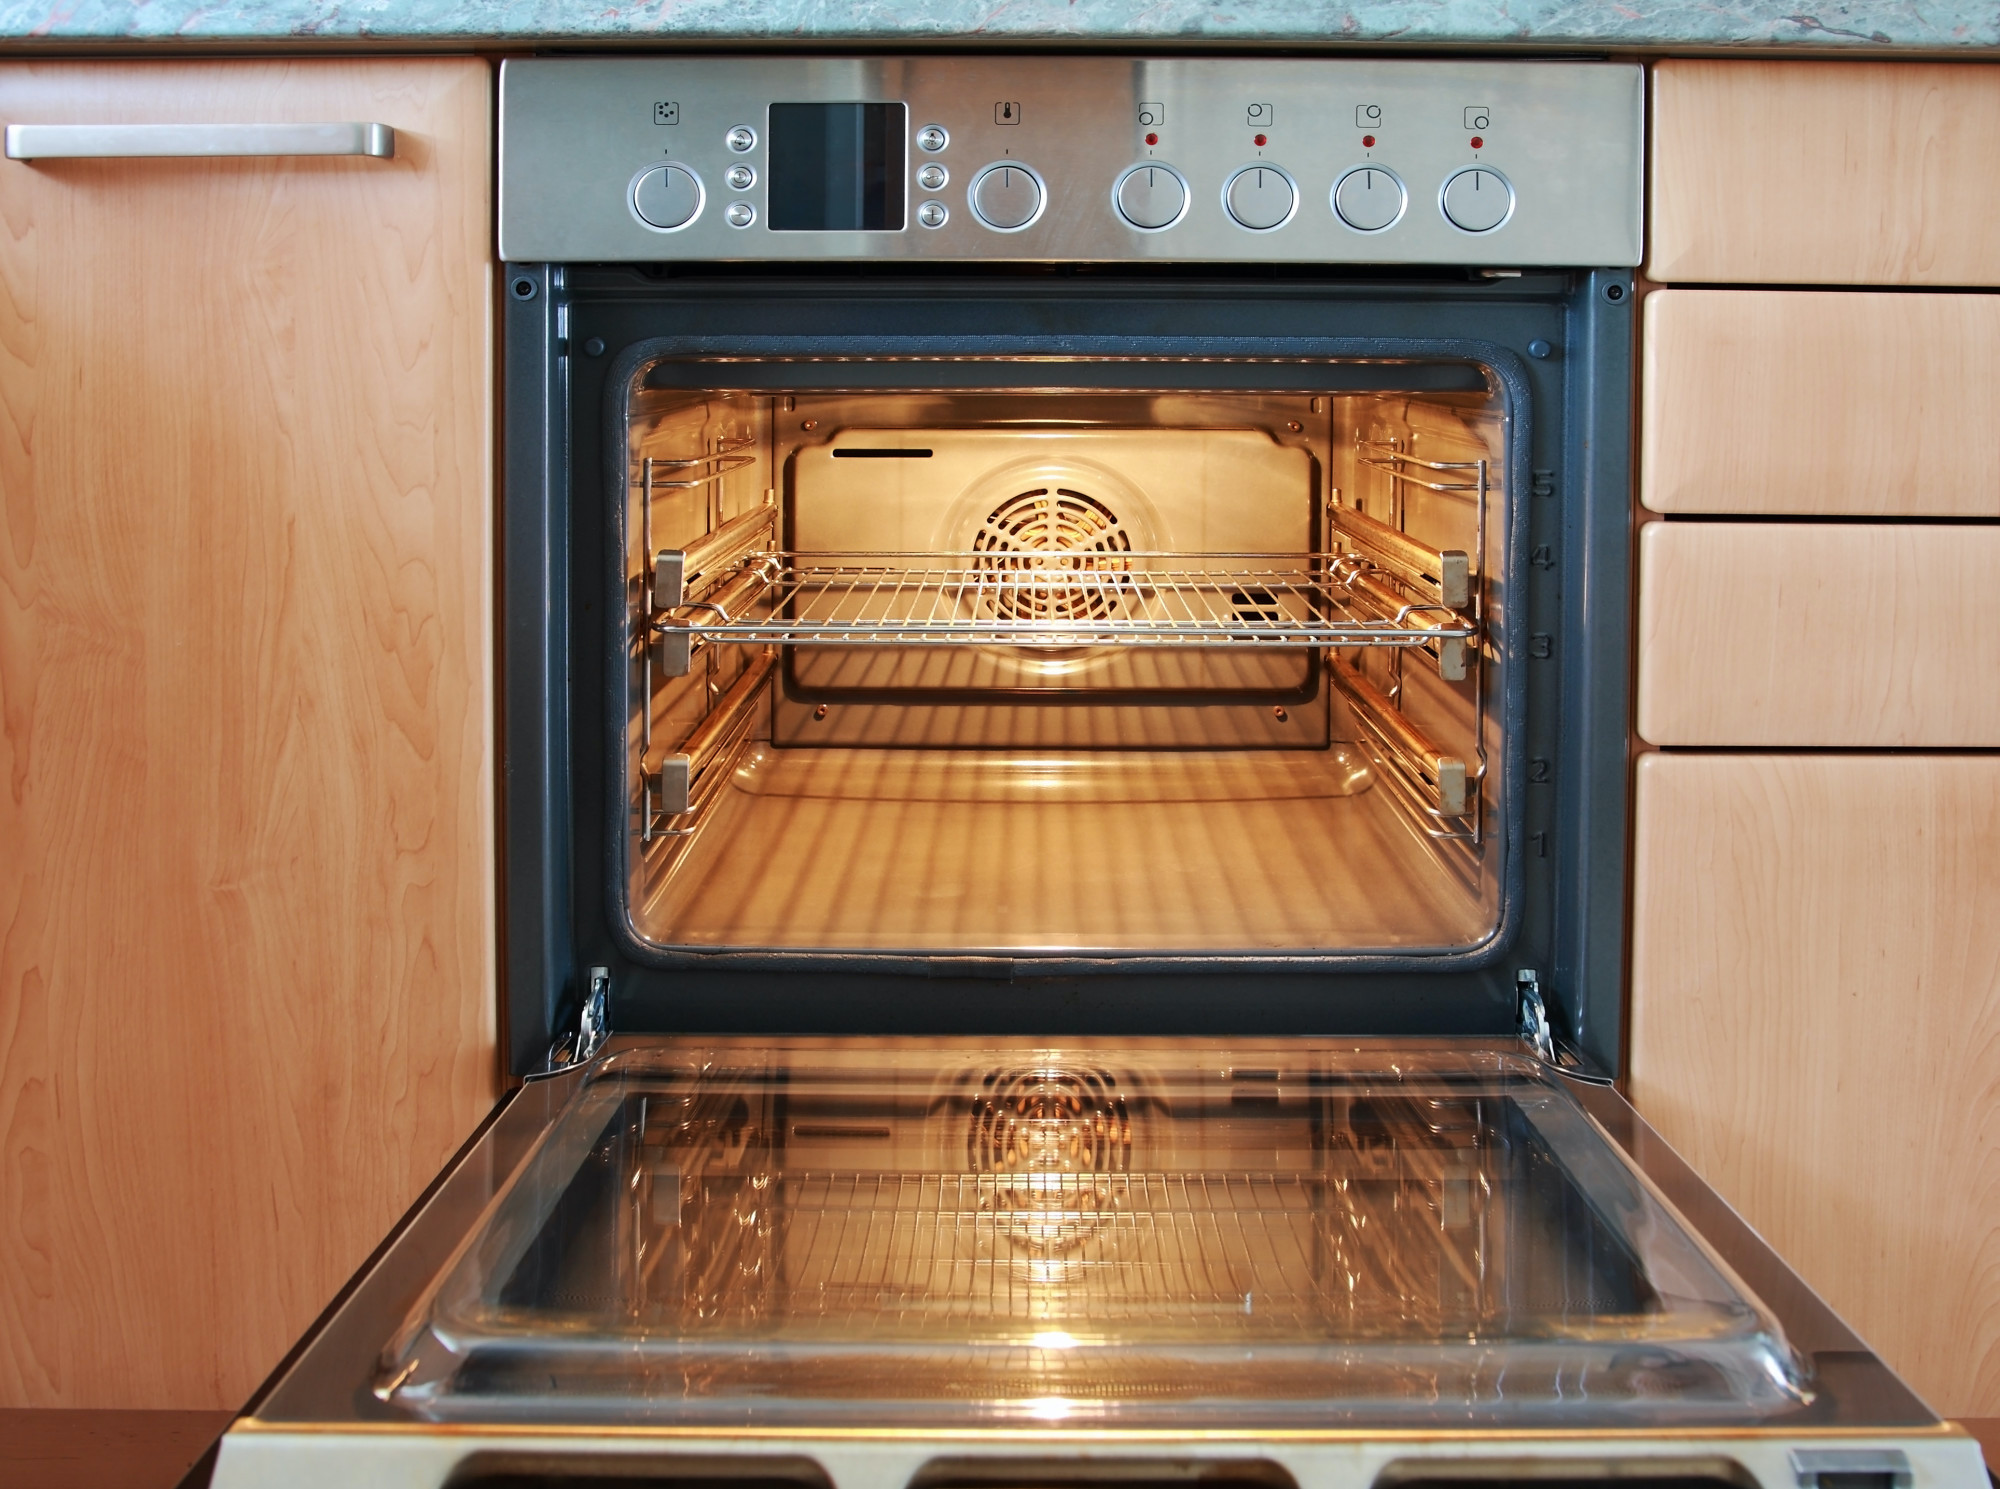 Hire an Oven Repair Service